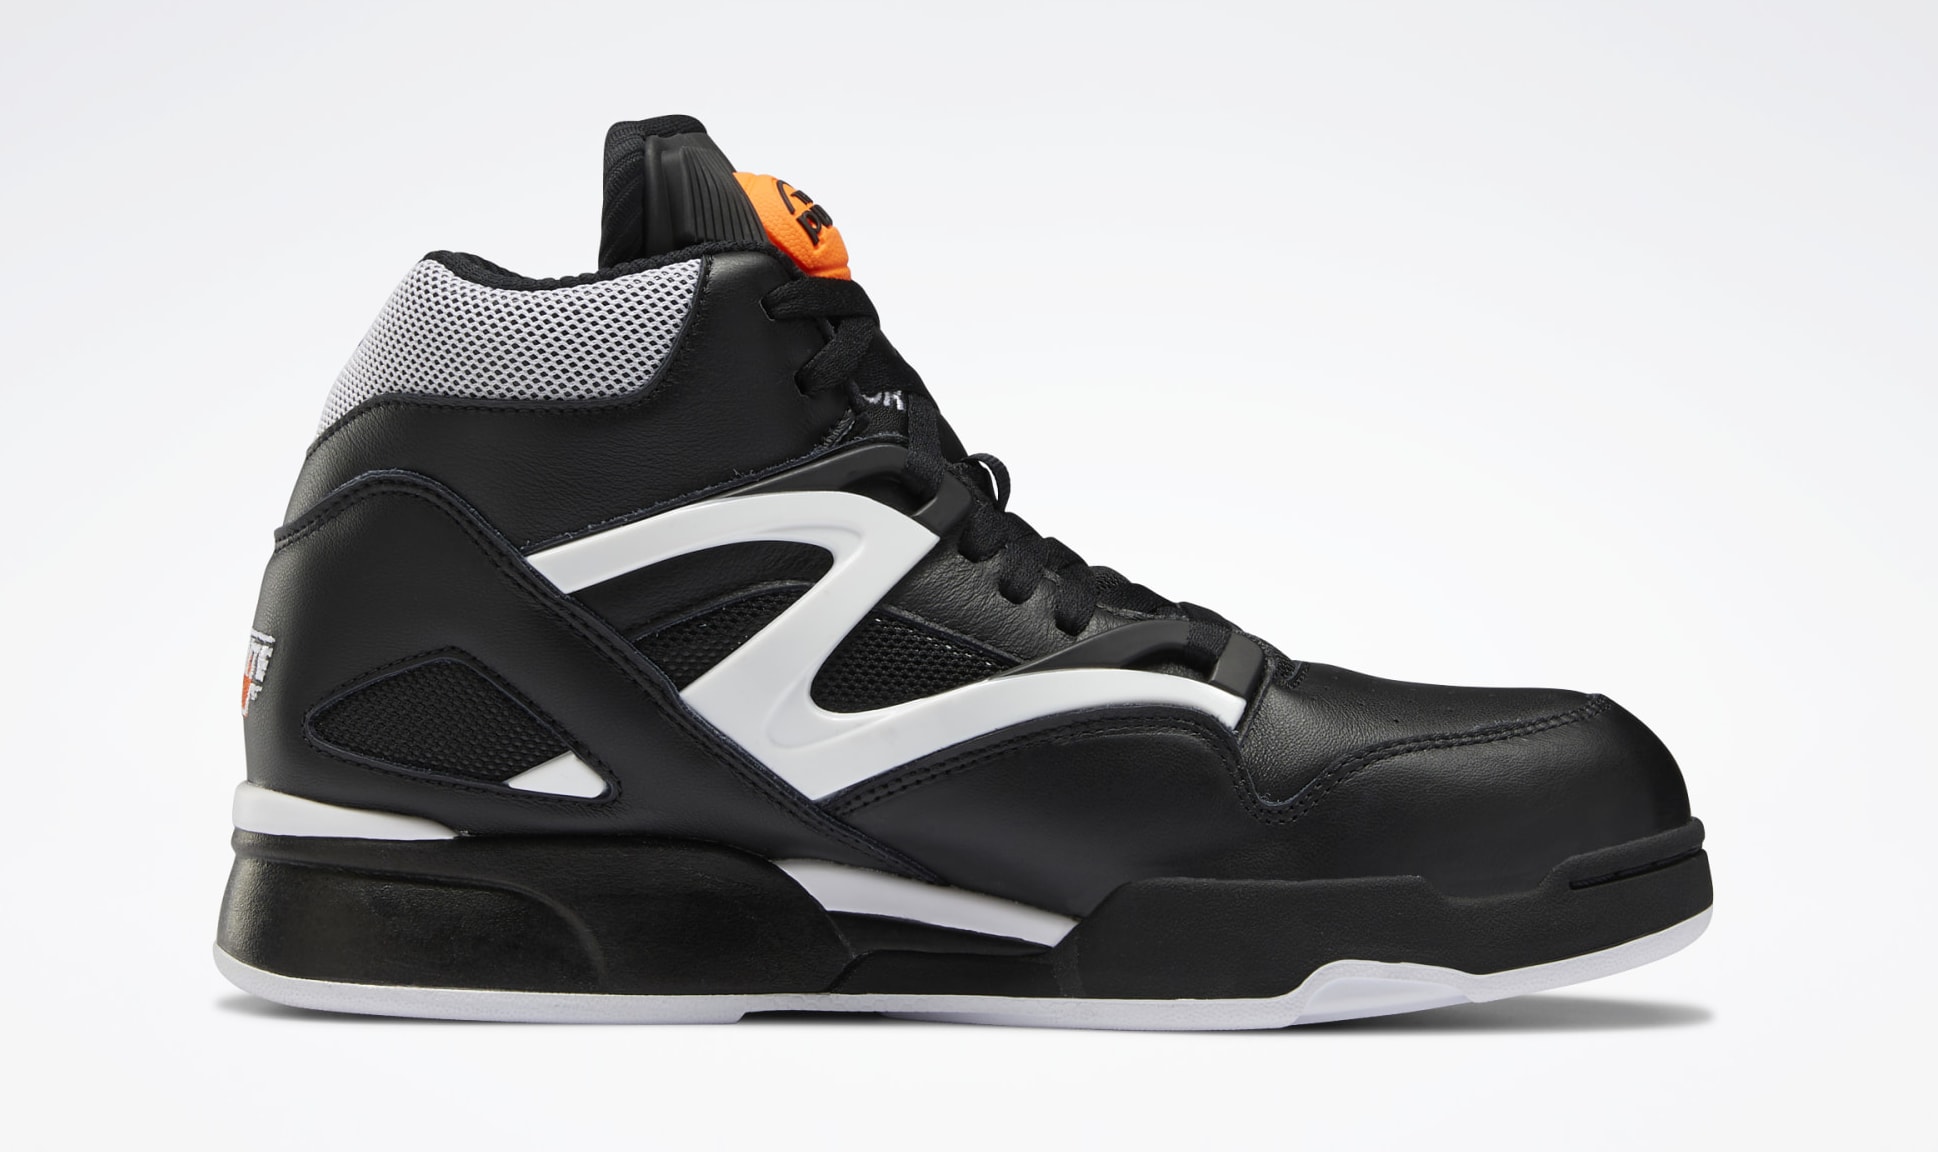 Dee Brown S Reebok Pumps Are Returning Soon Made Famous In The 1991 Nba